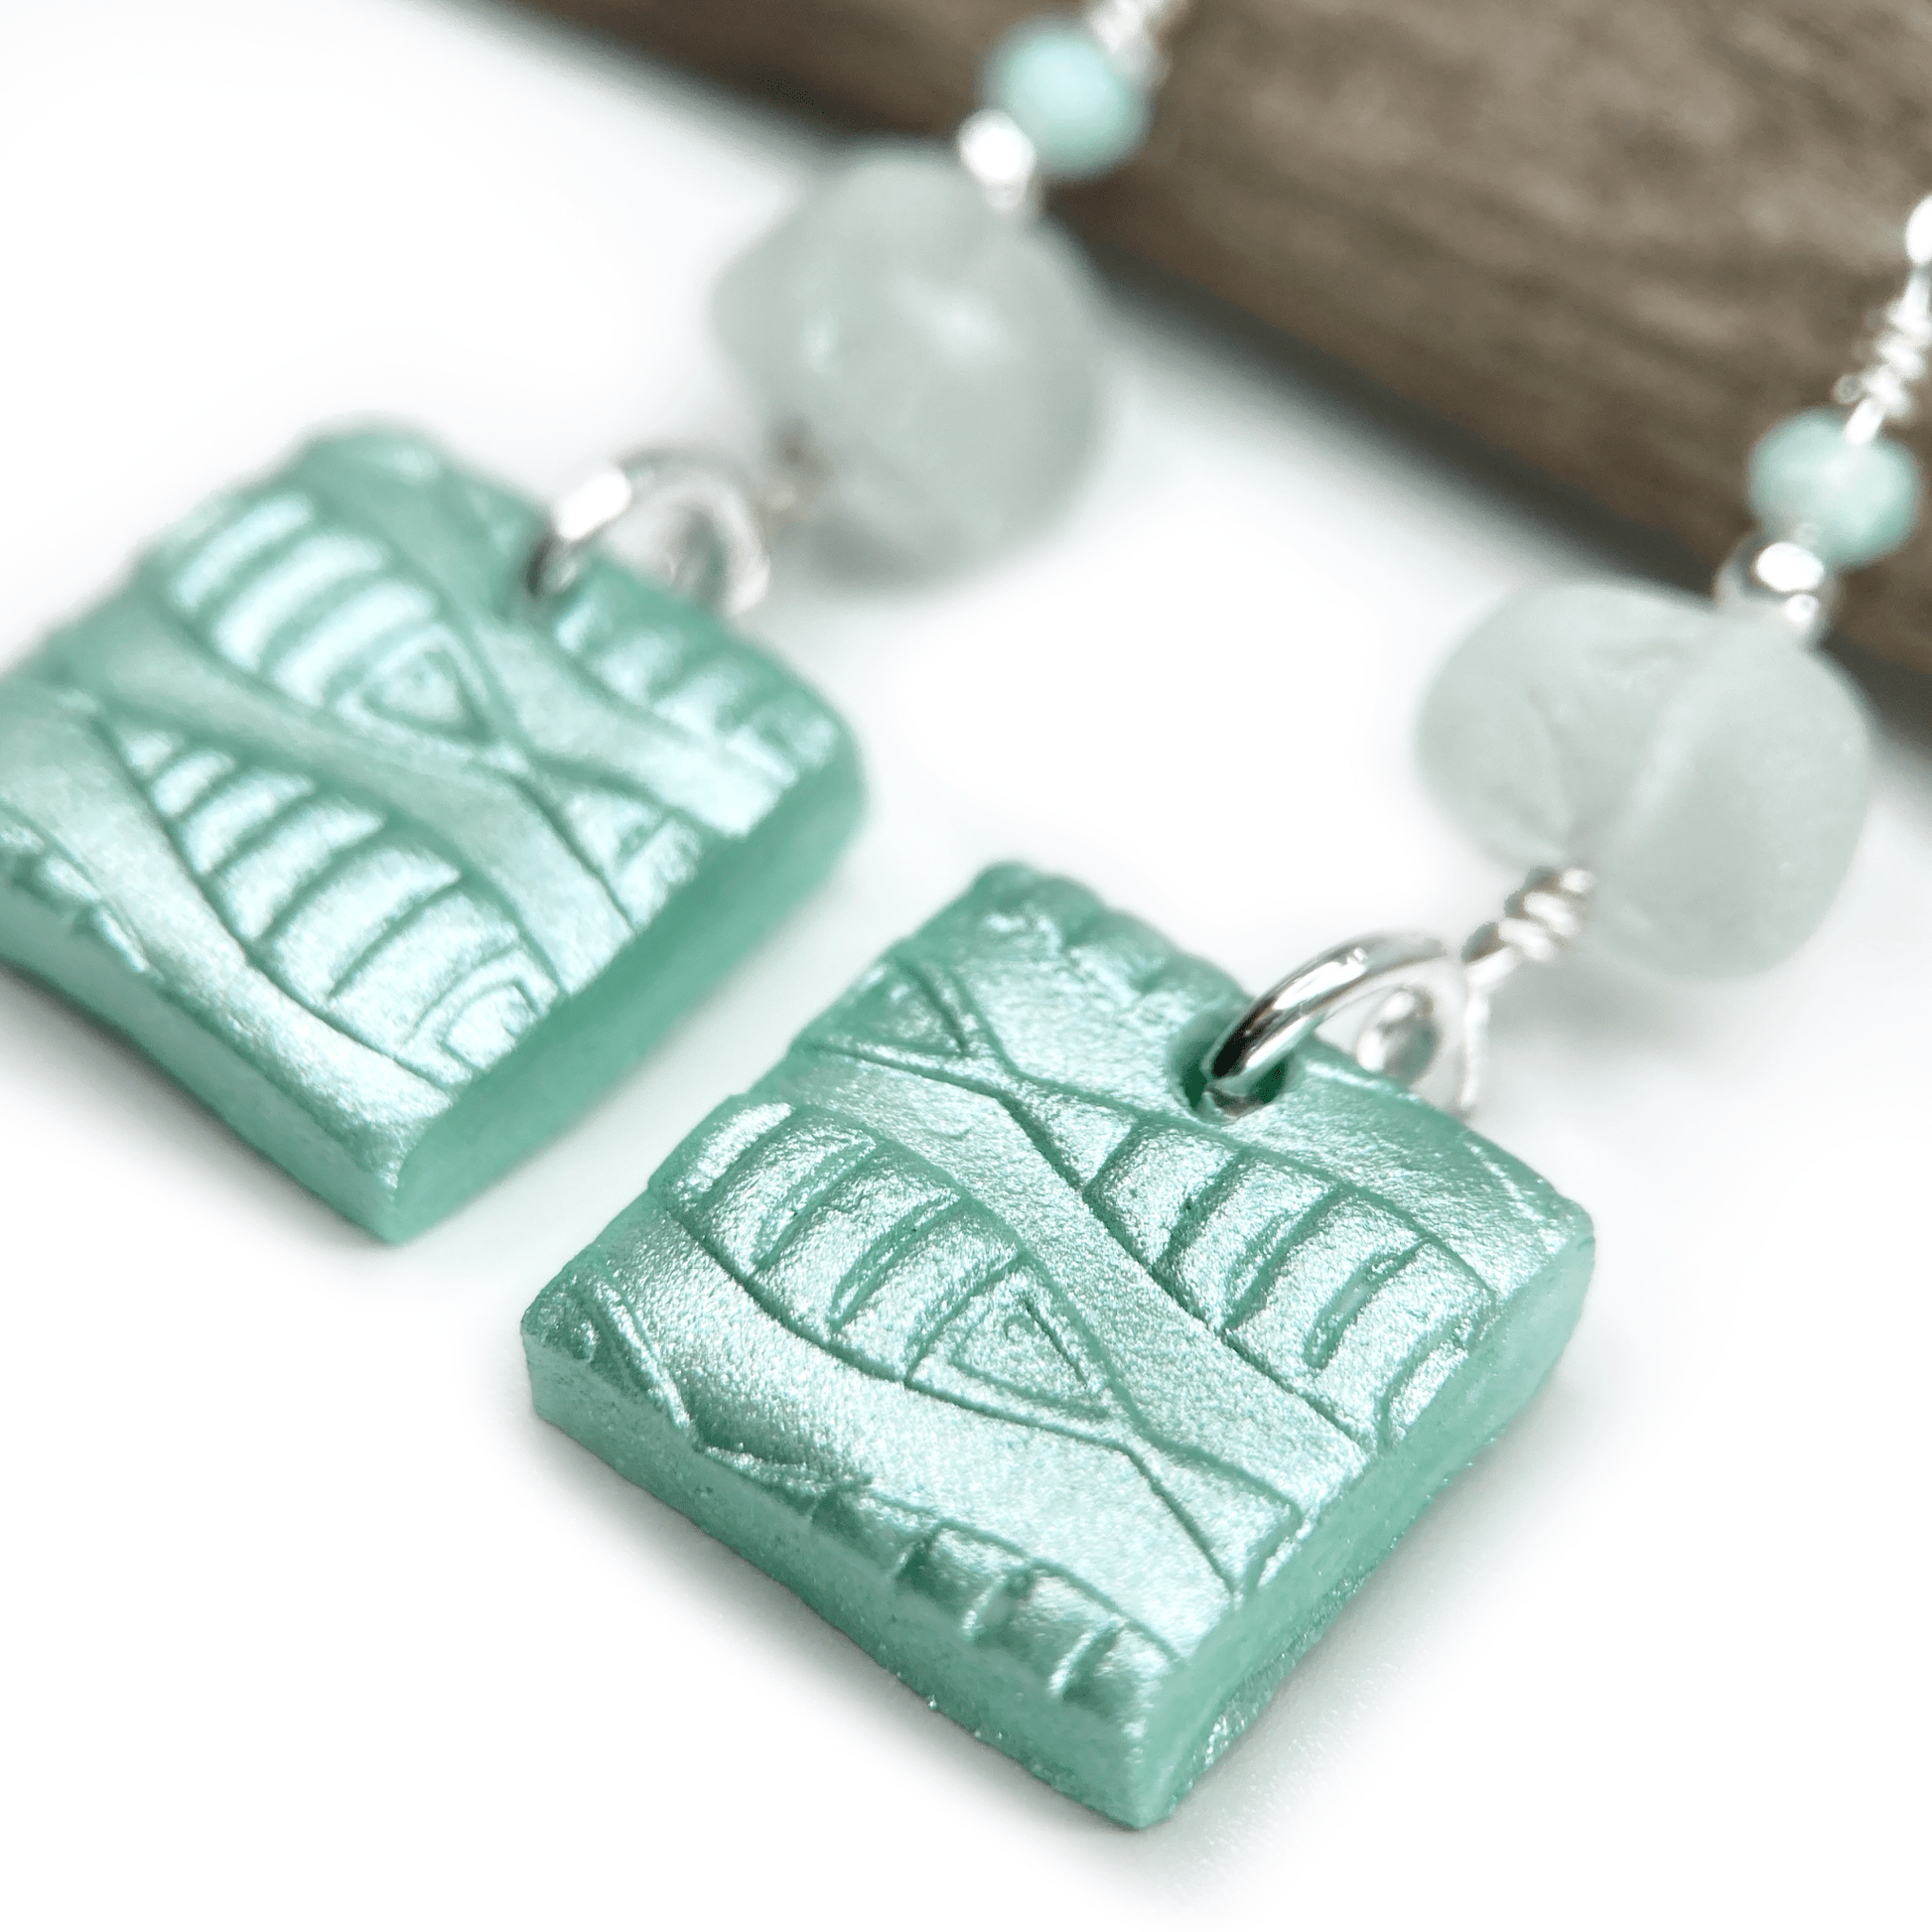 Fish Shoal Dangly Earrings - Green Sea Glass and Amazonite Sterling Silver Earrings - East Neuk Beach Crafts